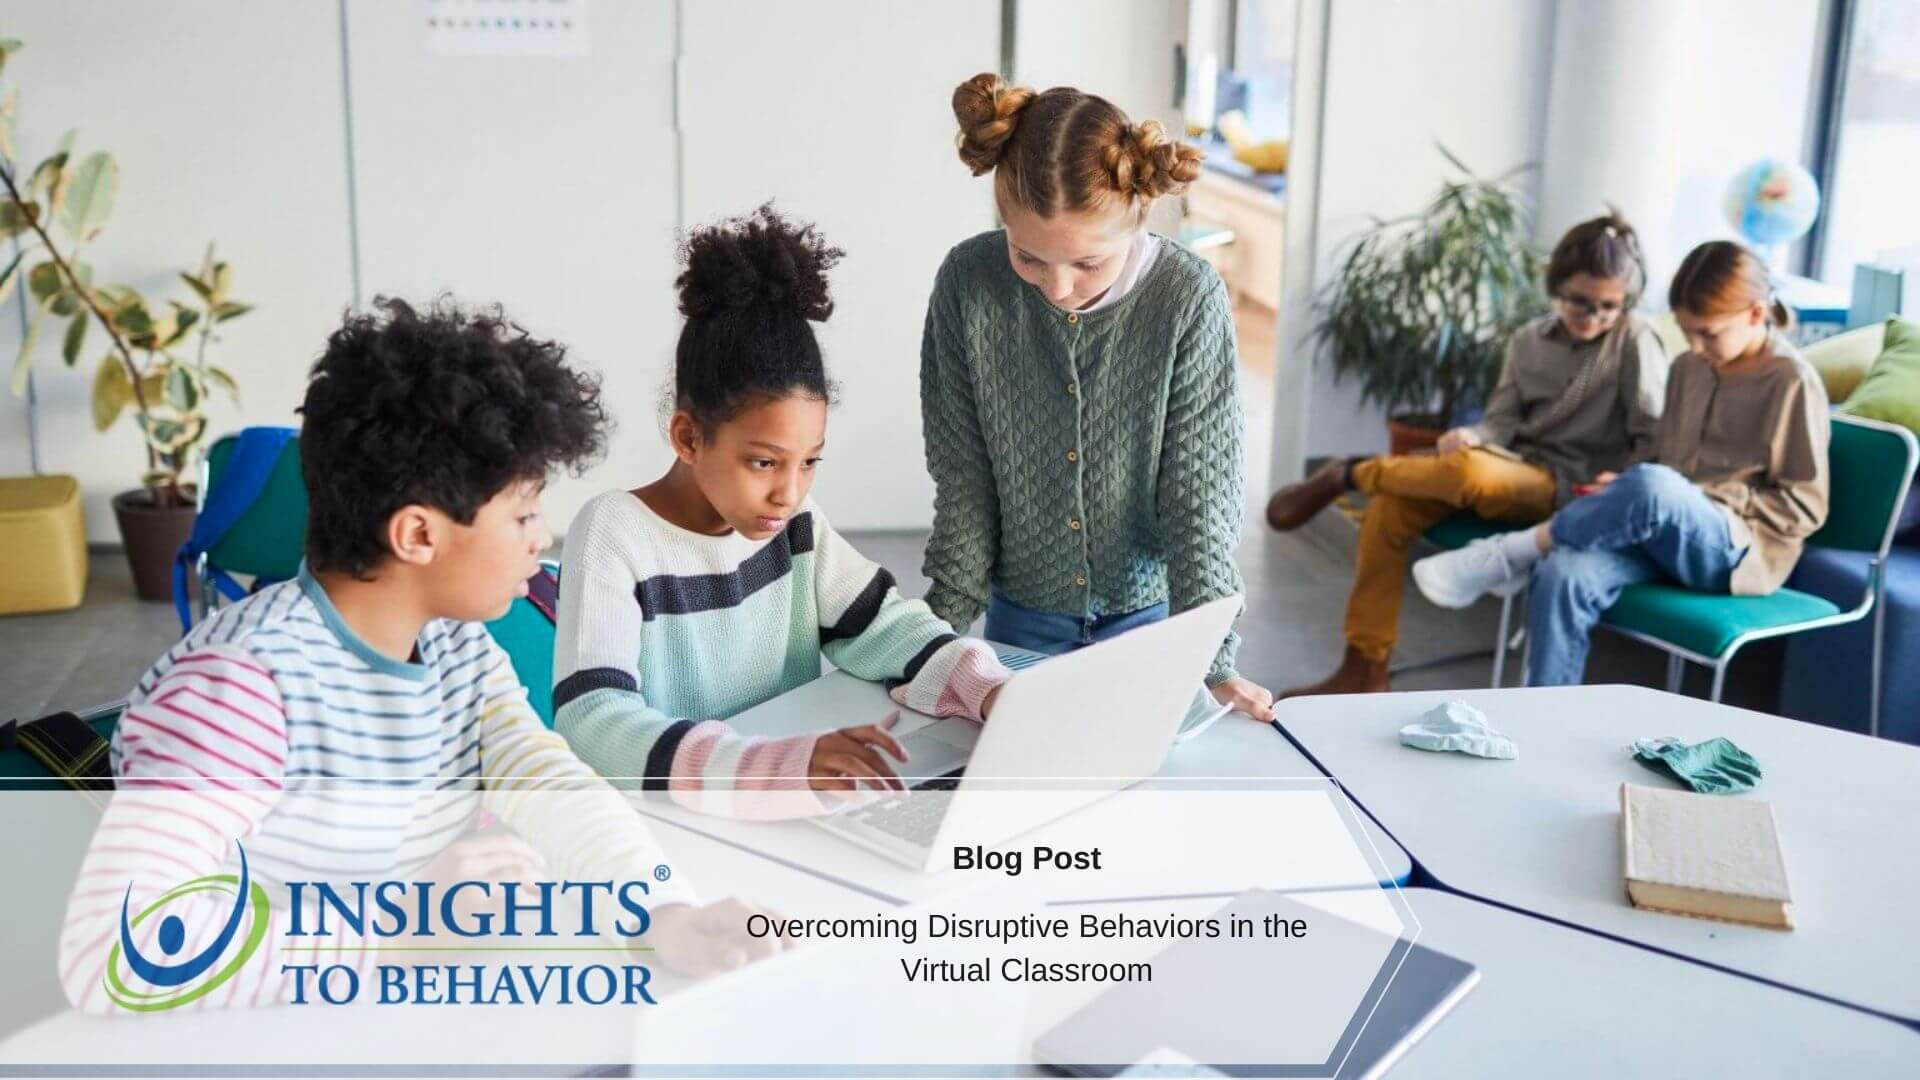 Insights to behavior blog post image template (1)